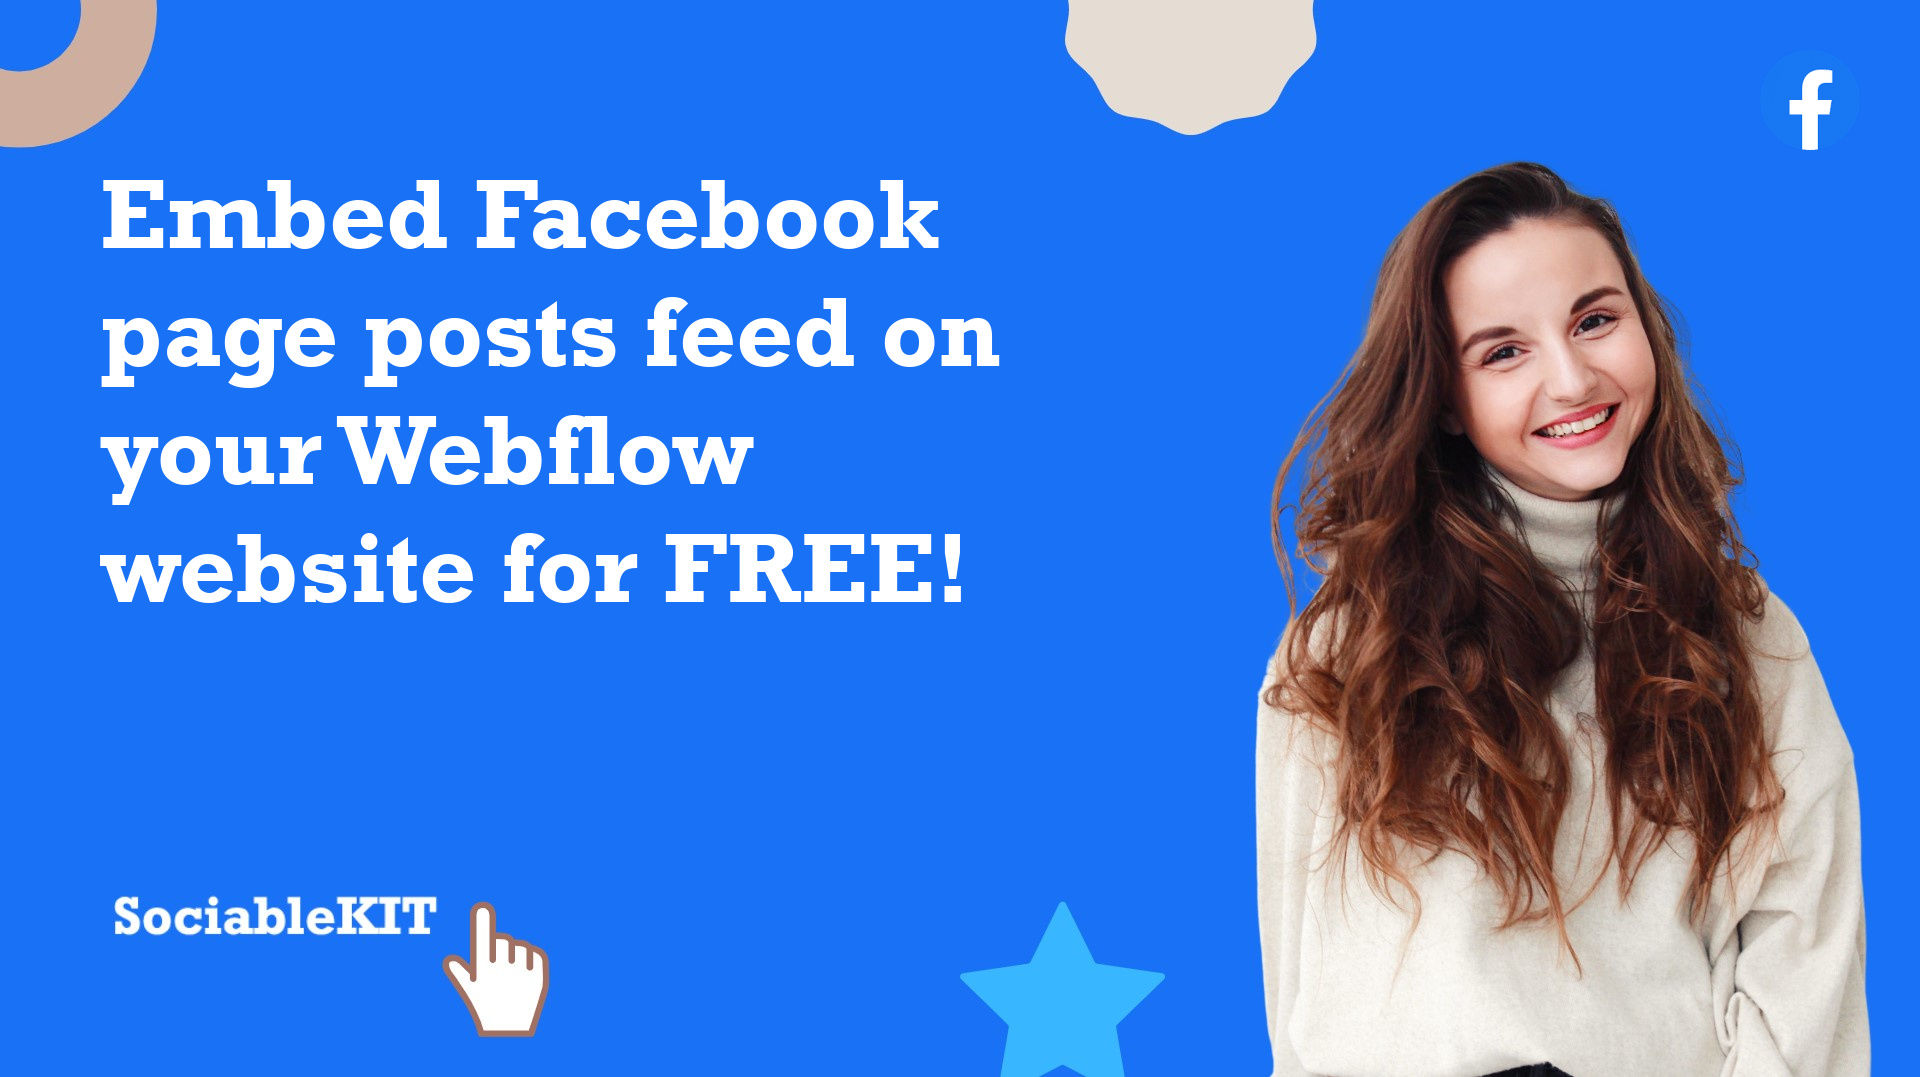 How to embed Facebook page posts feed on your Webflow website for FREE?